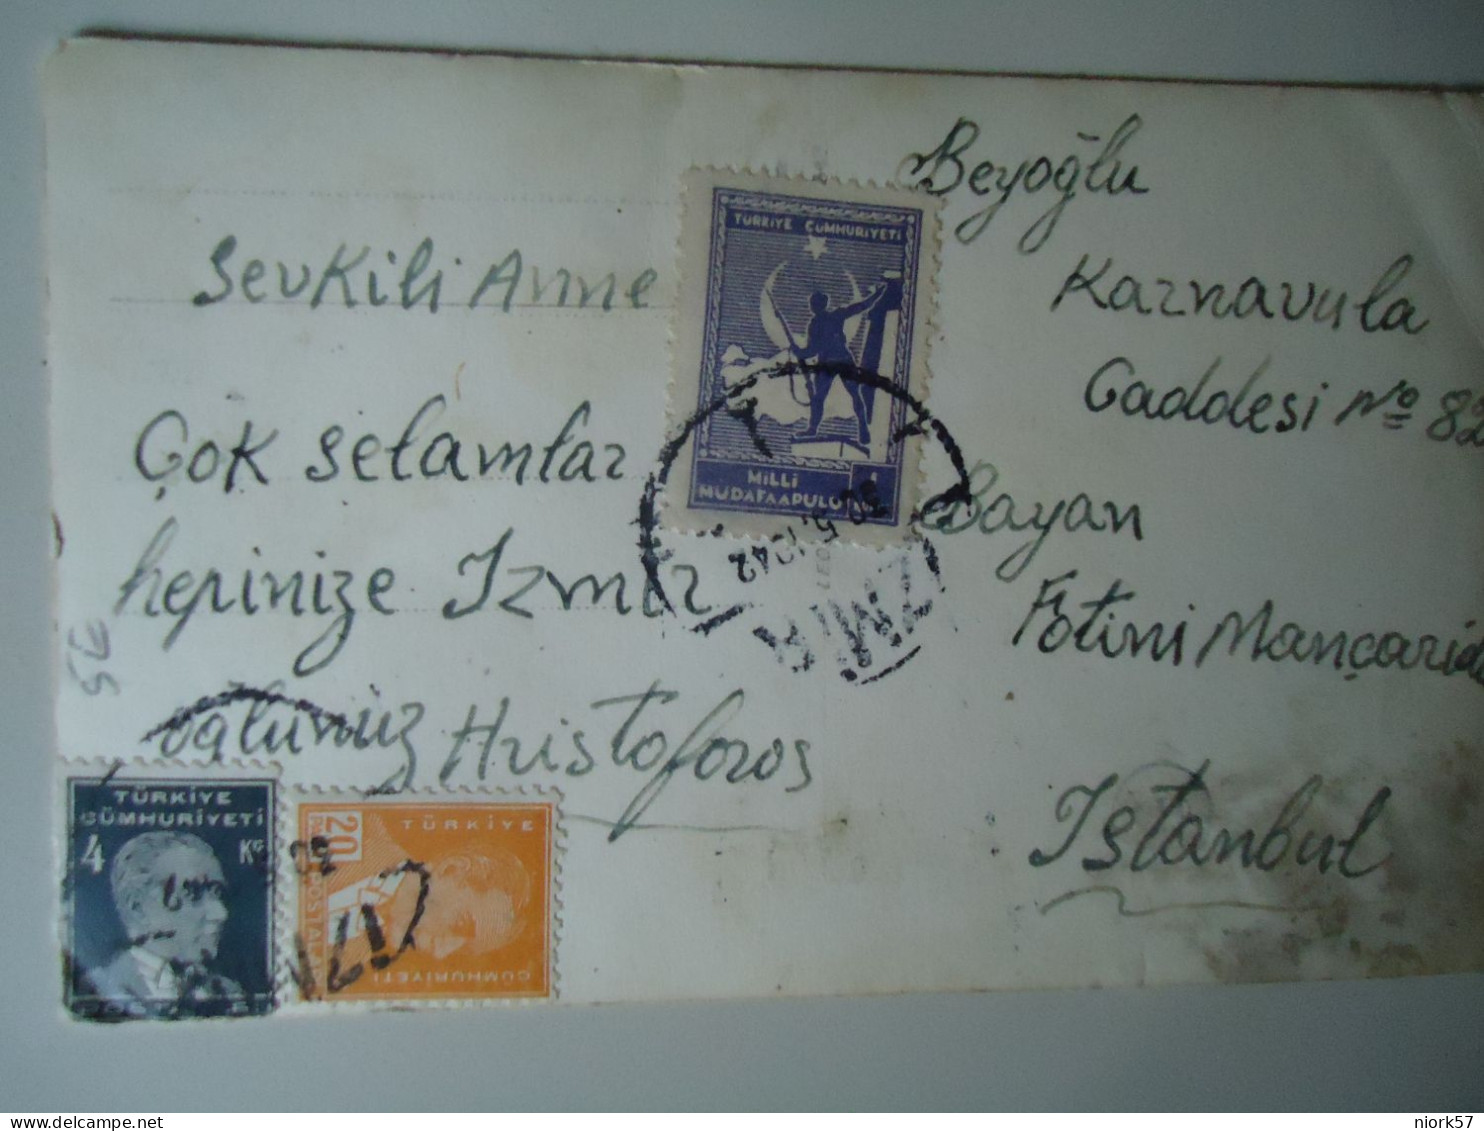 TURKEY  PHOTO  POSTCARDS  1942   ΣΤΗΝ ΚΩΝΣΤΑΝΤΙΝΟΥΠΛΗ  CONSTANTINOPLE 3 STAMPS IZMIR  FOR MORE PURCHASES 10% DISCOUNT - Grèce